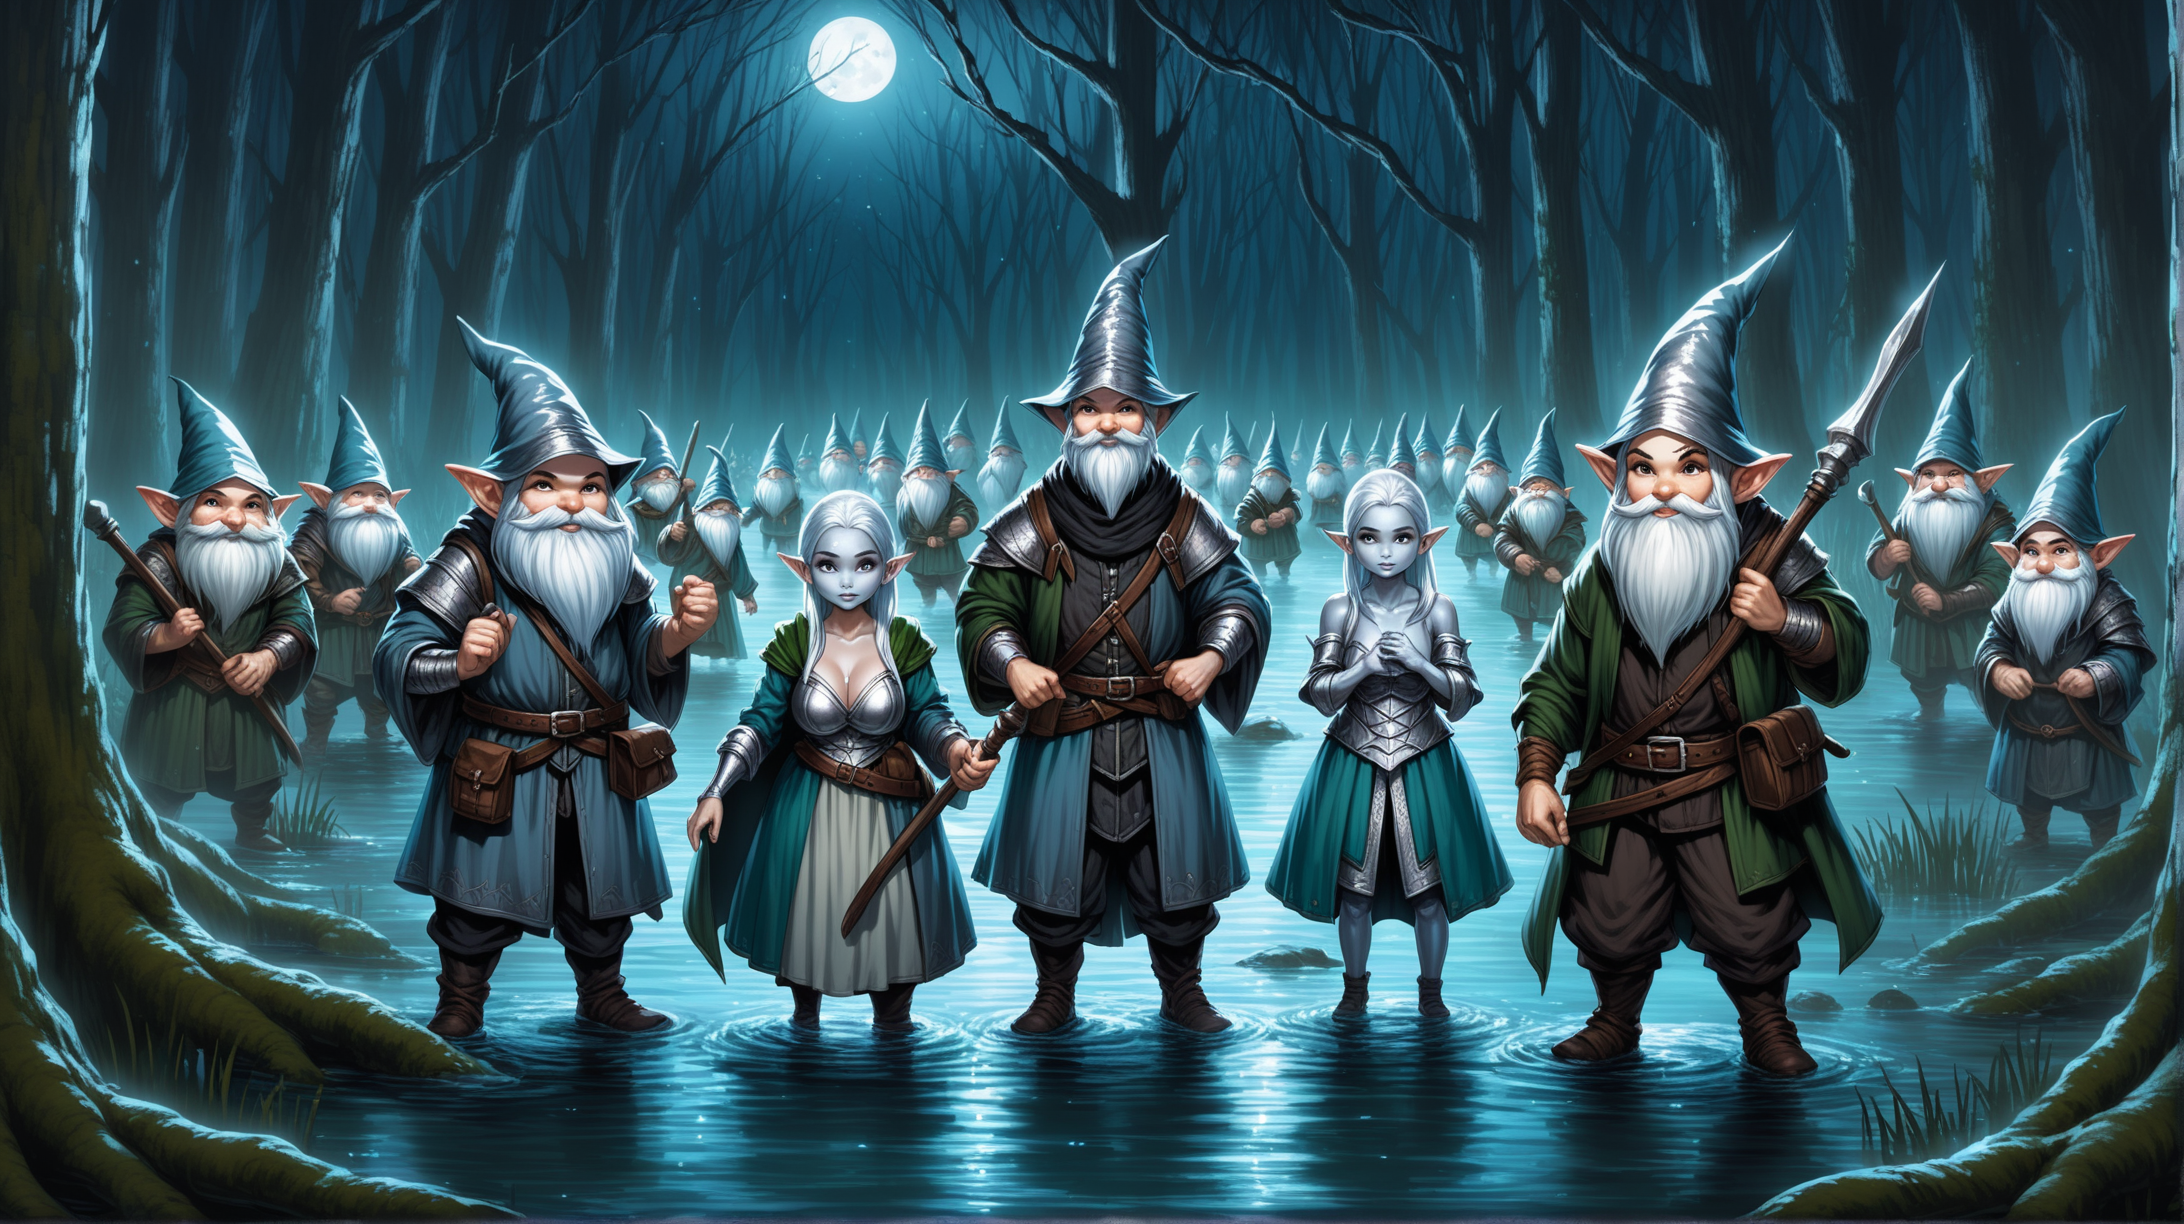 young silver skin gnomes with silver skin, men and clean shaved women with no beard and silver skin, rogues and wizards, dark swamp, night, Medieval fantasy